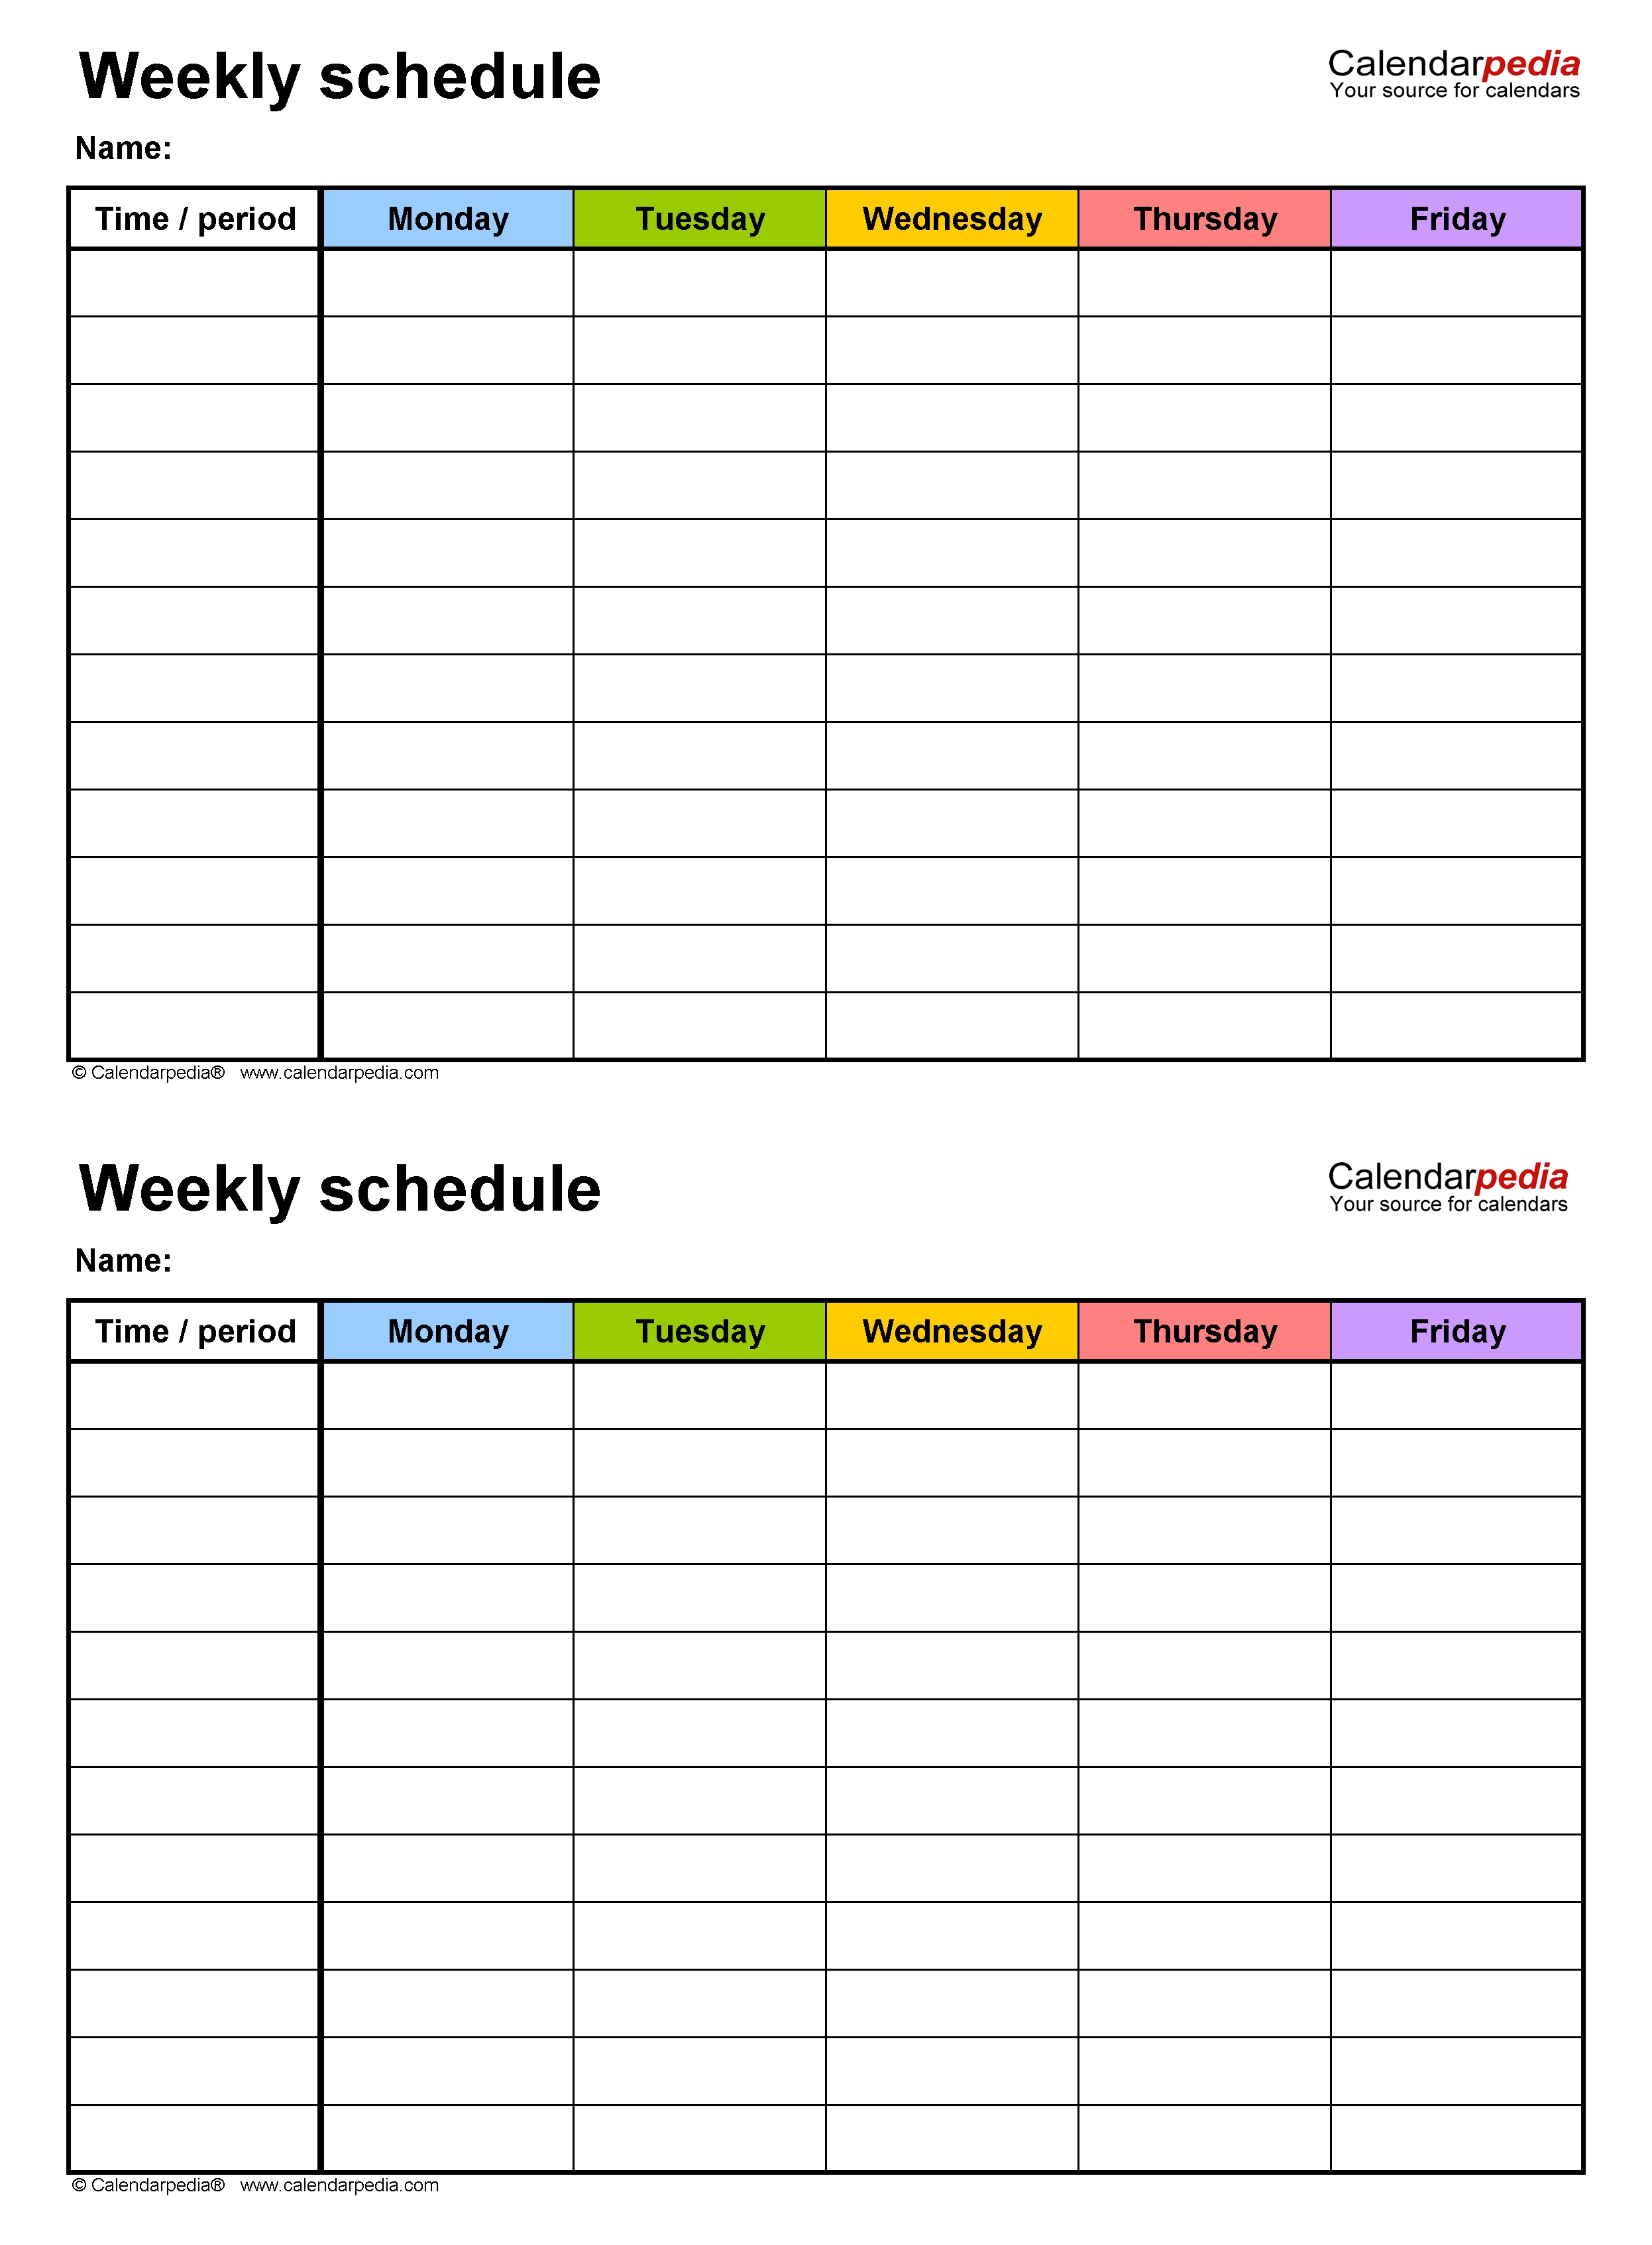 Free Weekly Schedule Templates For Pdf - 18 Templates  Design 7 Days Calendar Pdf